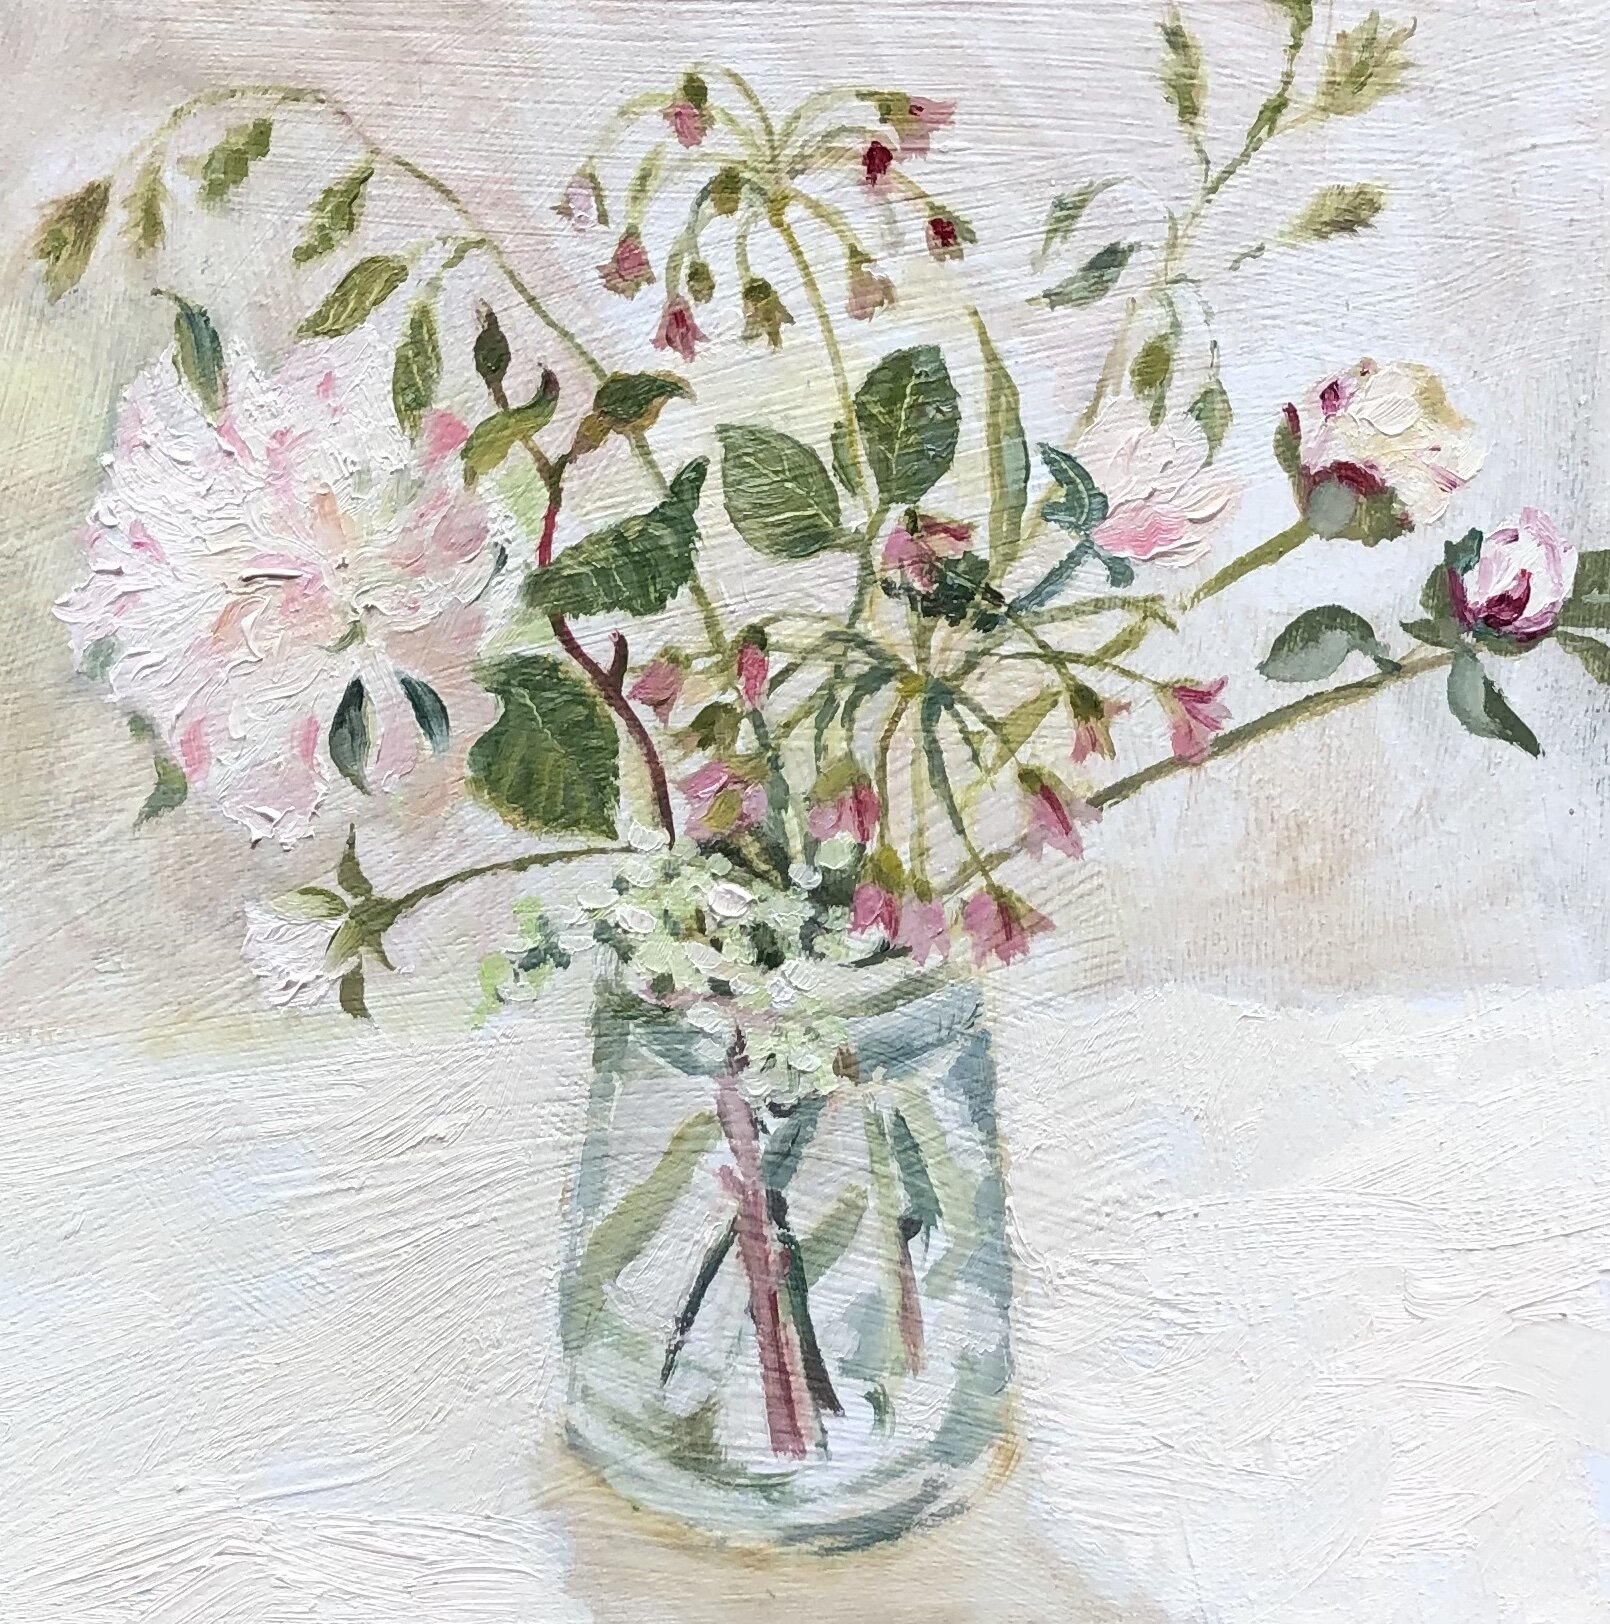 Peonies and Alliums, 8" x 8", oil on board, sold